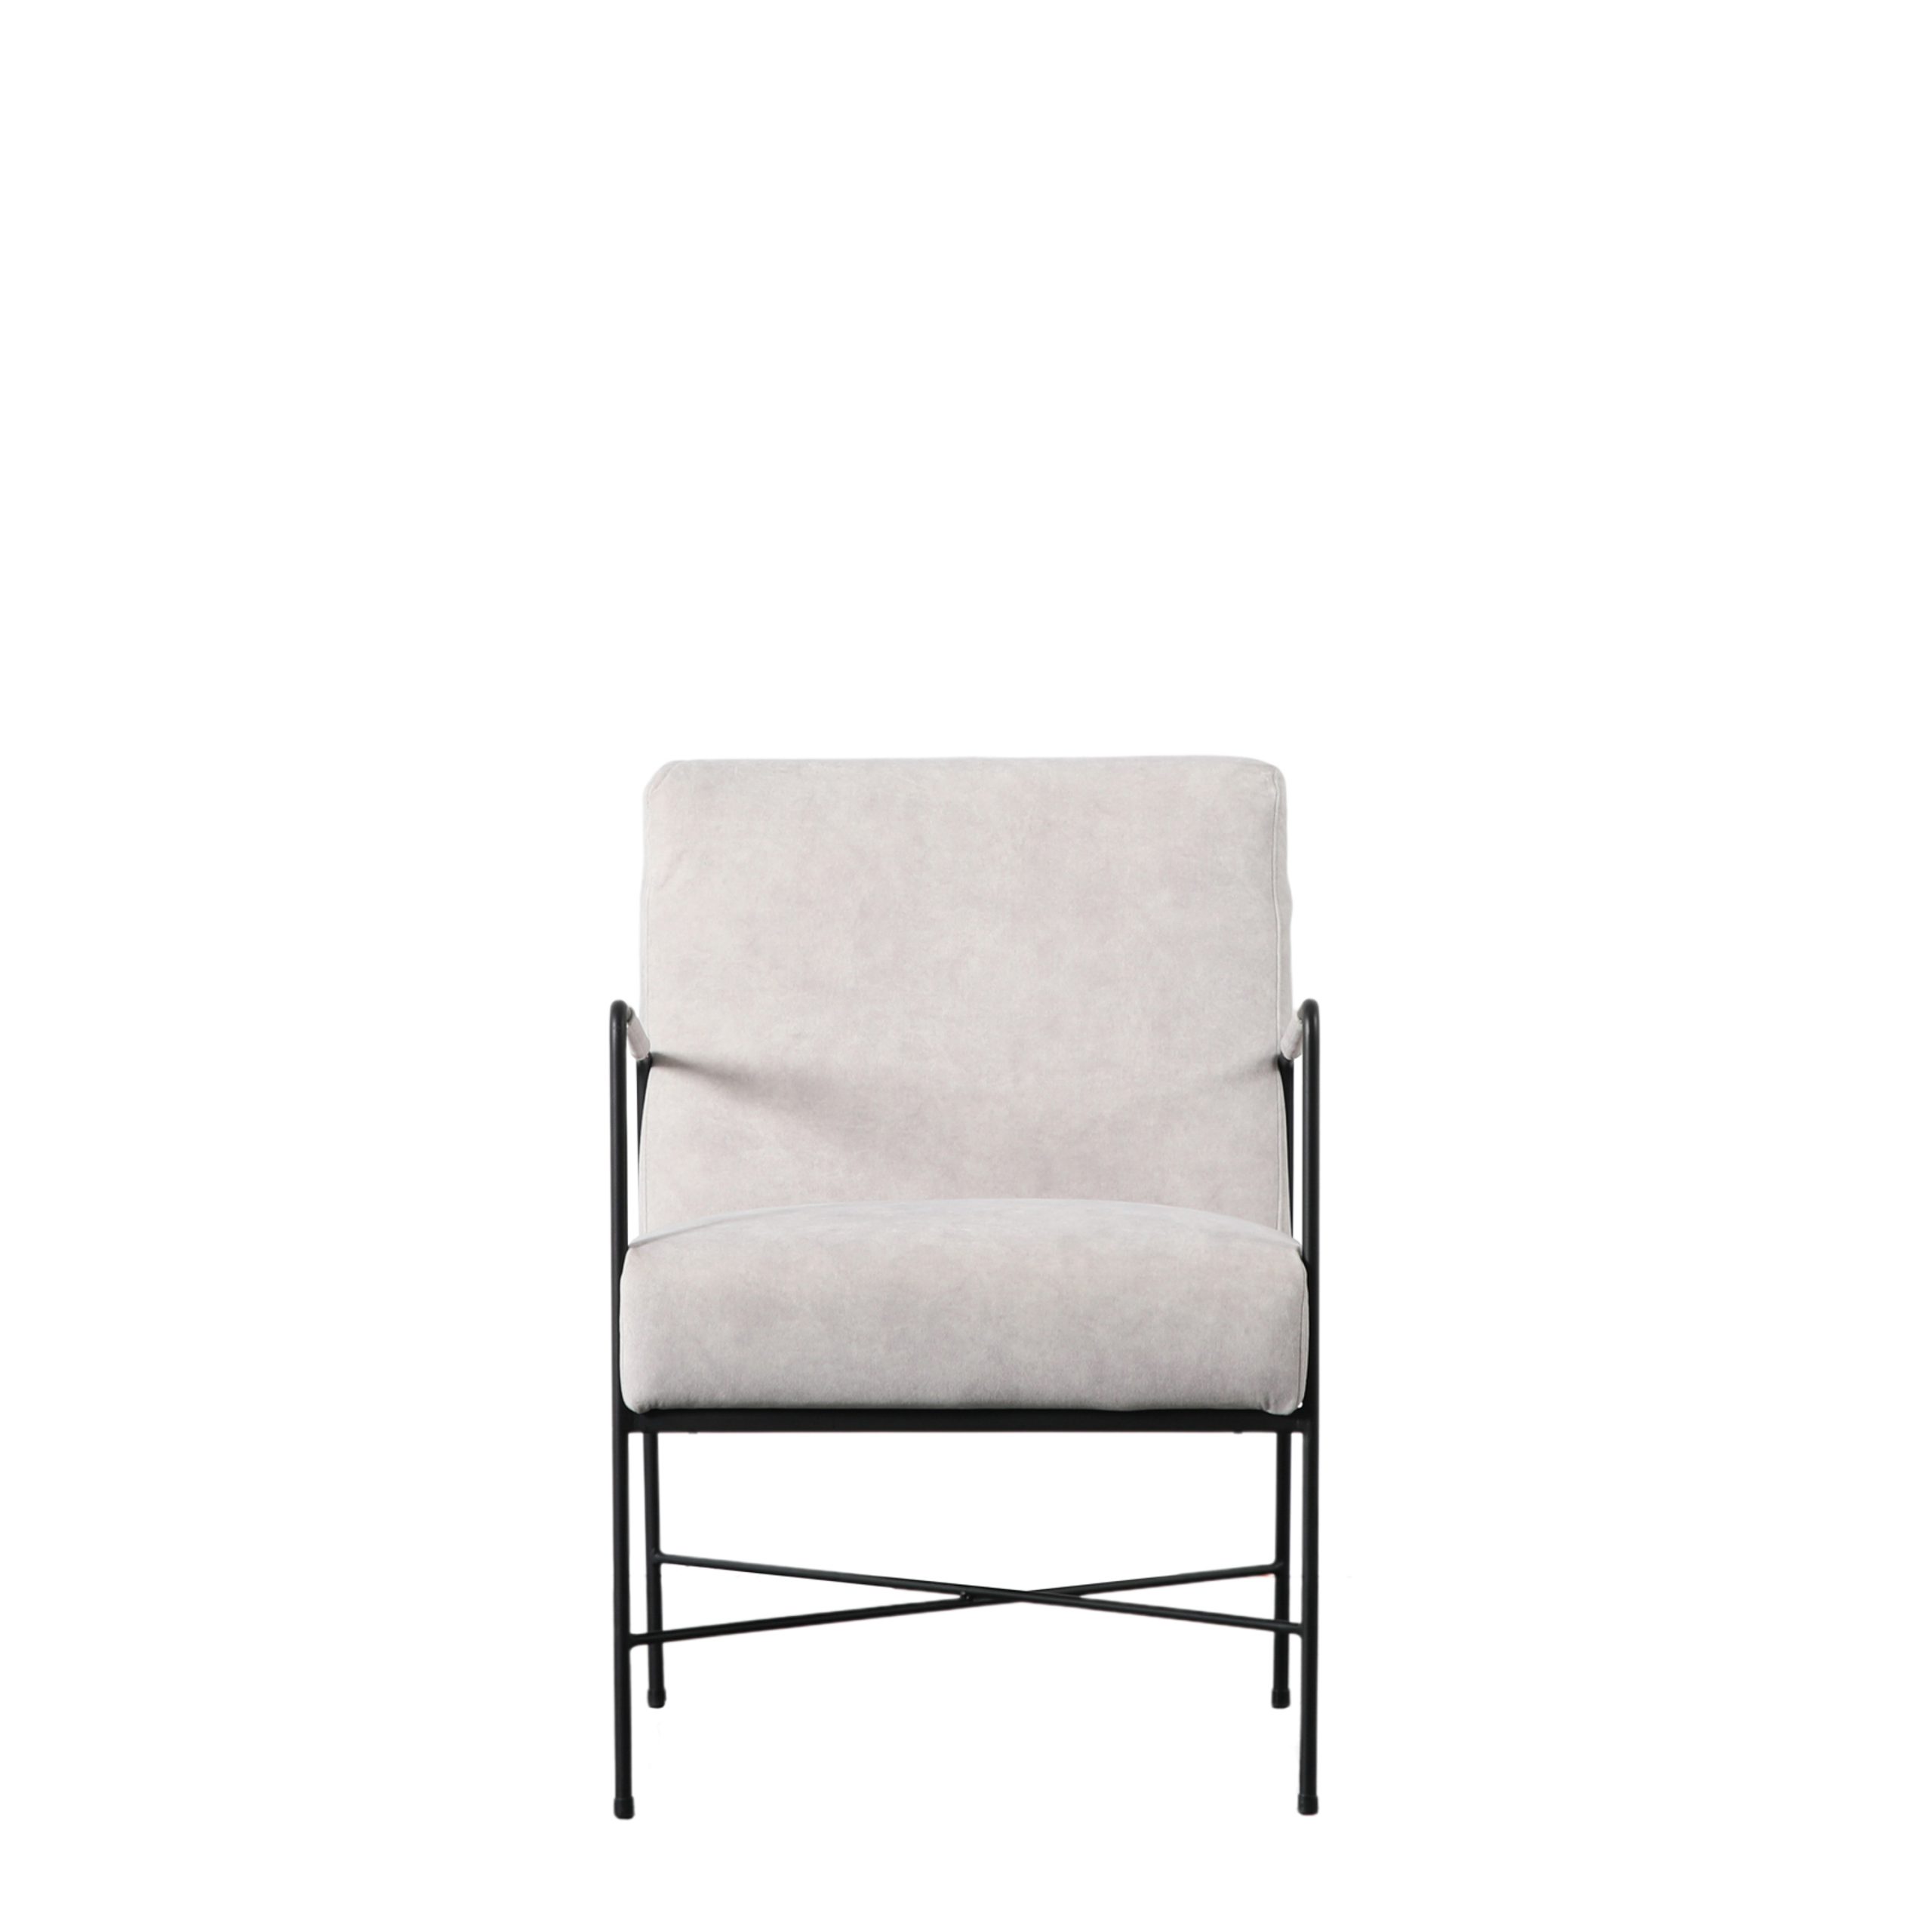 Gallery Direct Chartham Armchair White